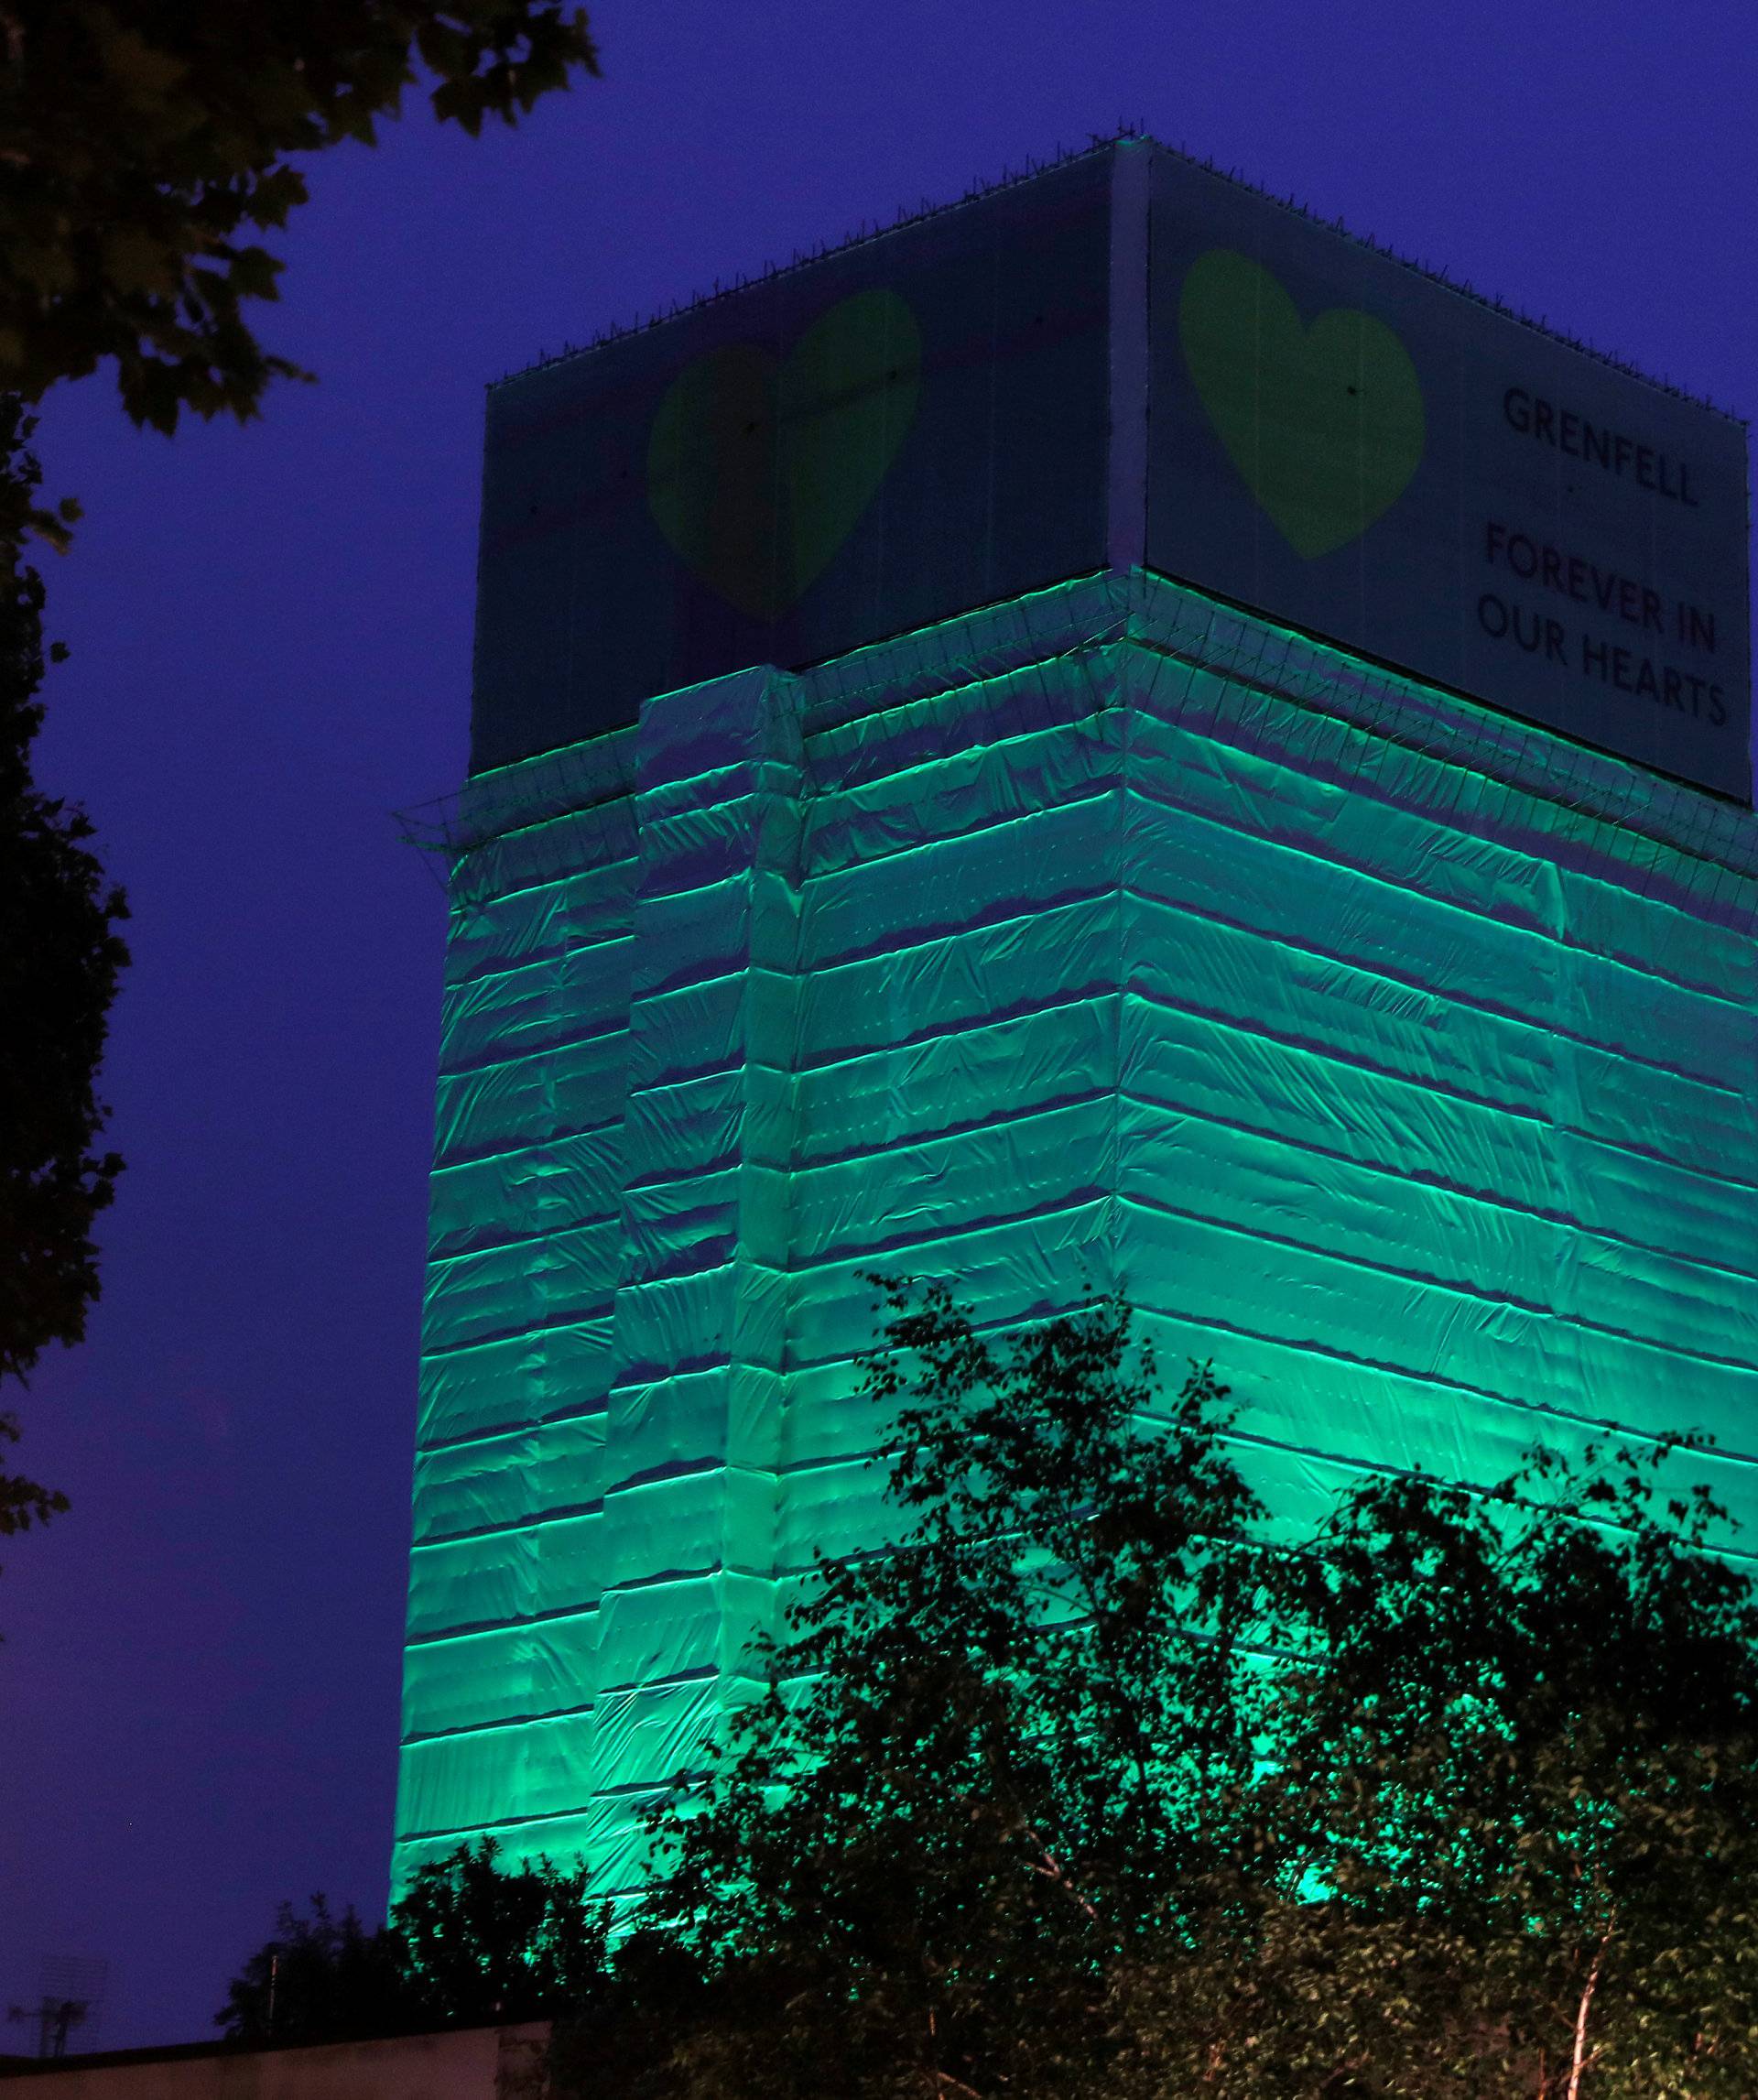 Grenfell Tower is seen covered and illuminated with green light one year after the tower fire in Britain, in London